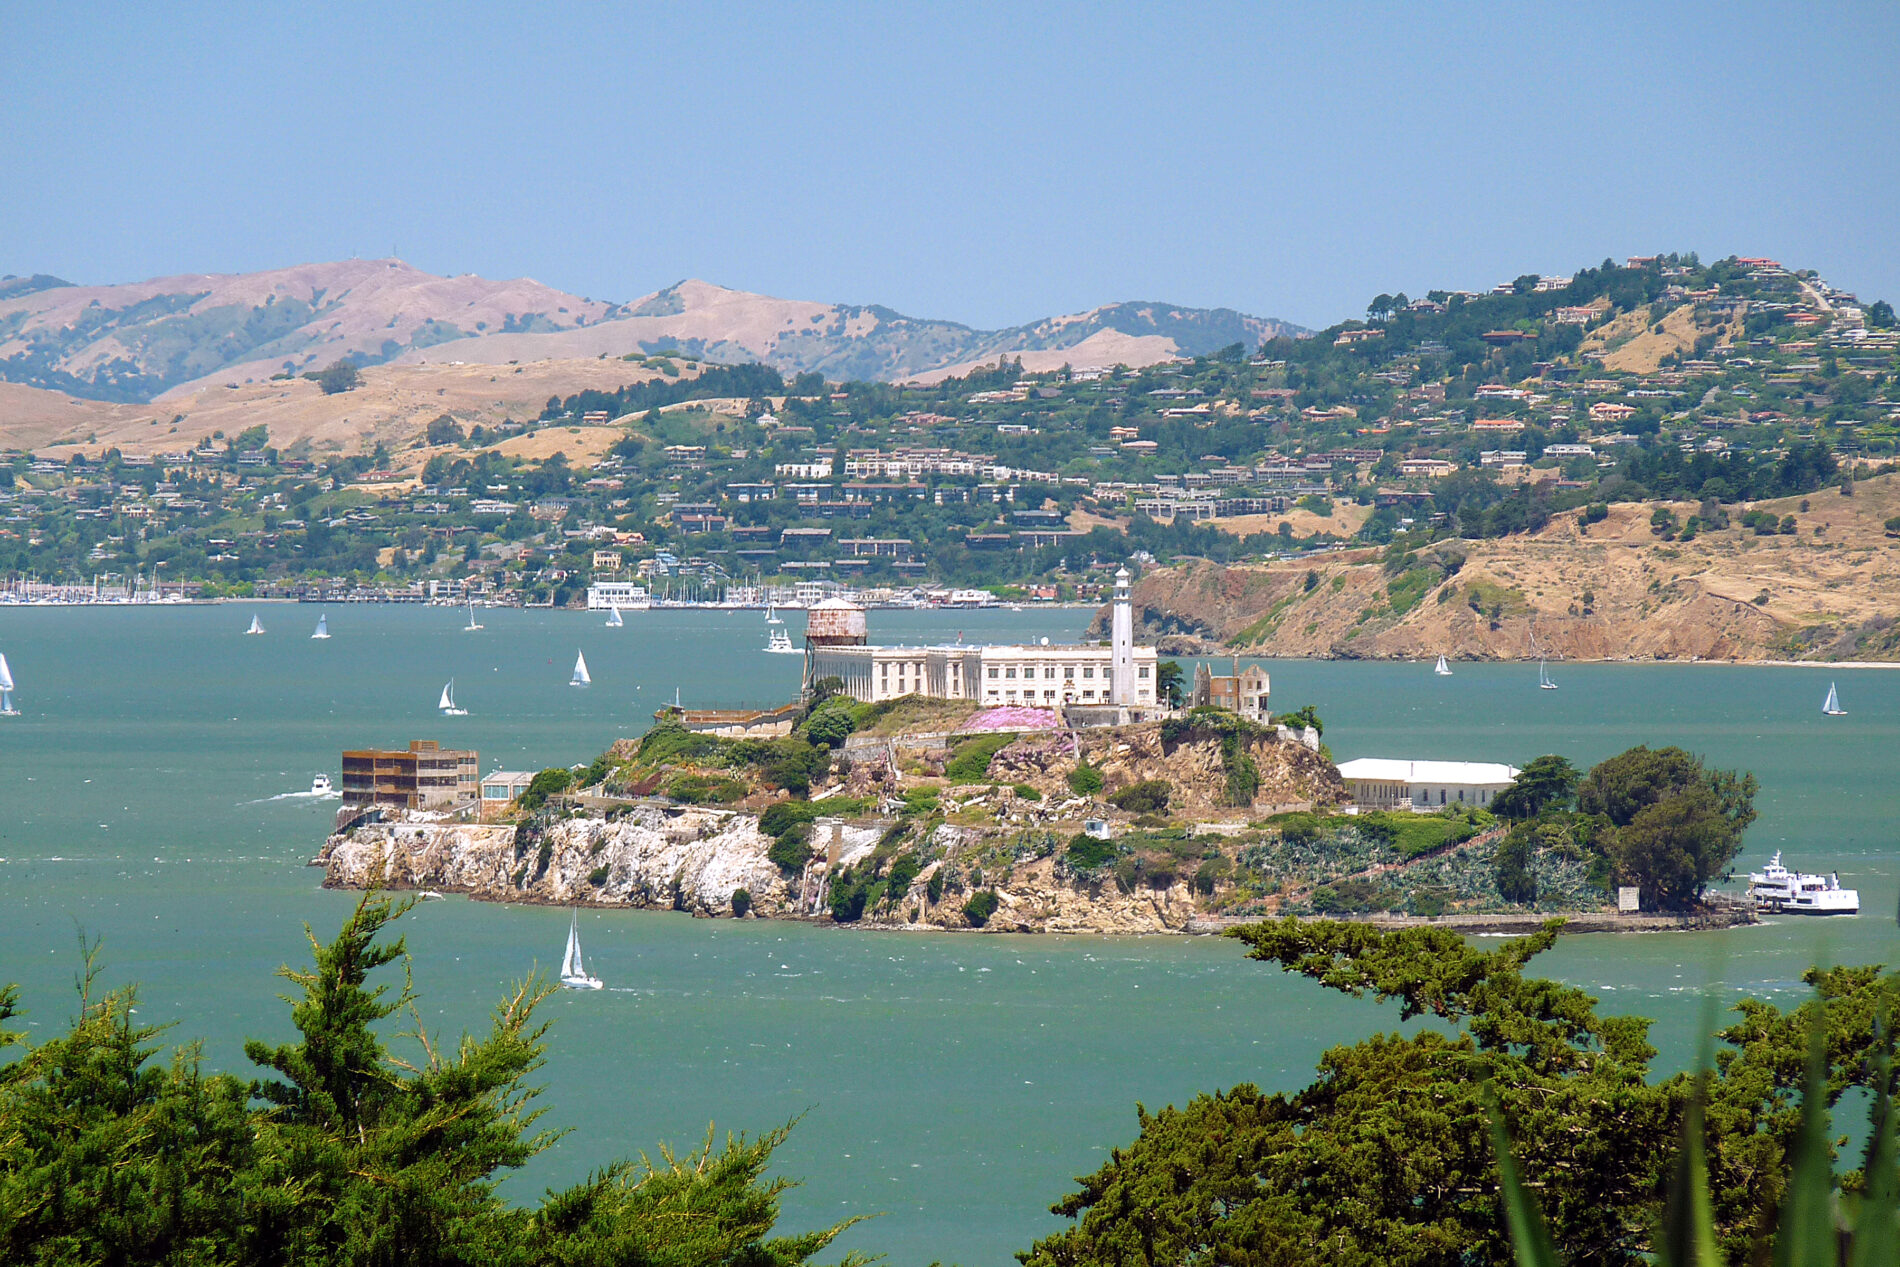 Alcatraz Island is home to a former notorious federal prison and is a popular San Francisco attraction with children.